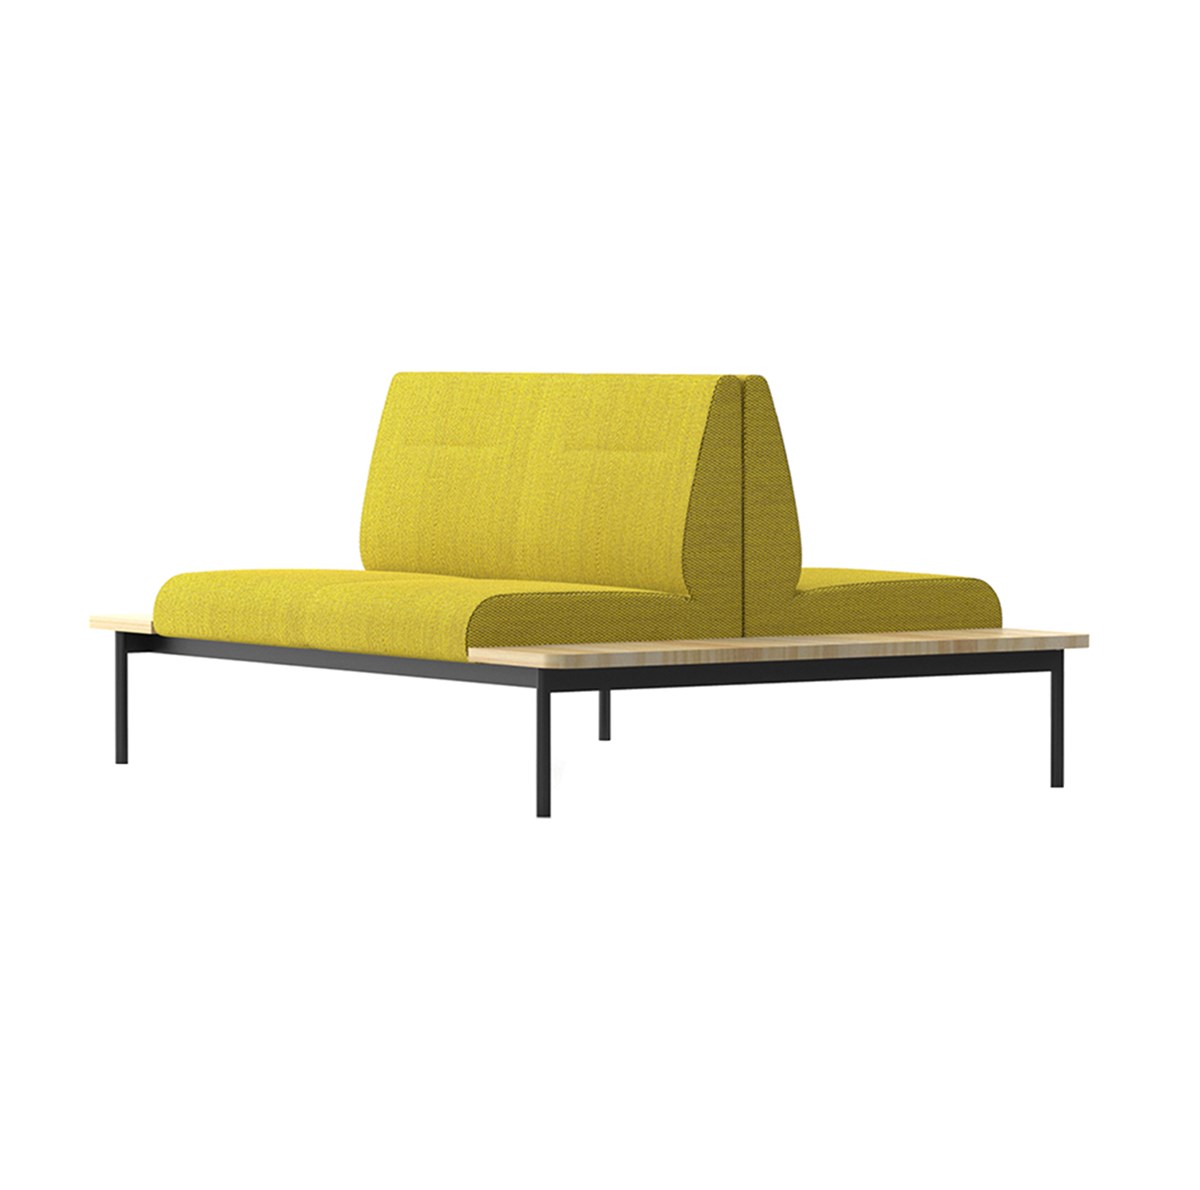 Neospace-Convey-Sofa-System-Contract-Matisse-2